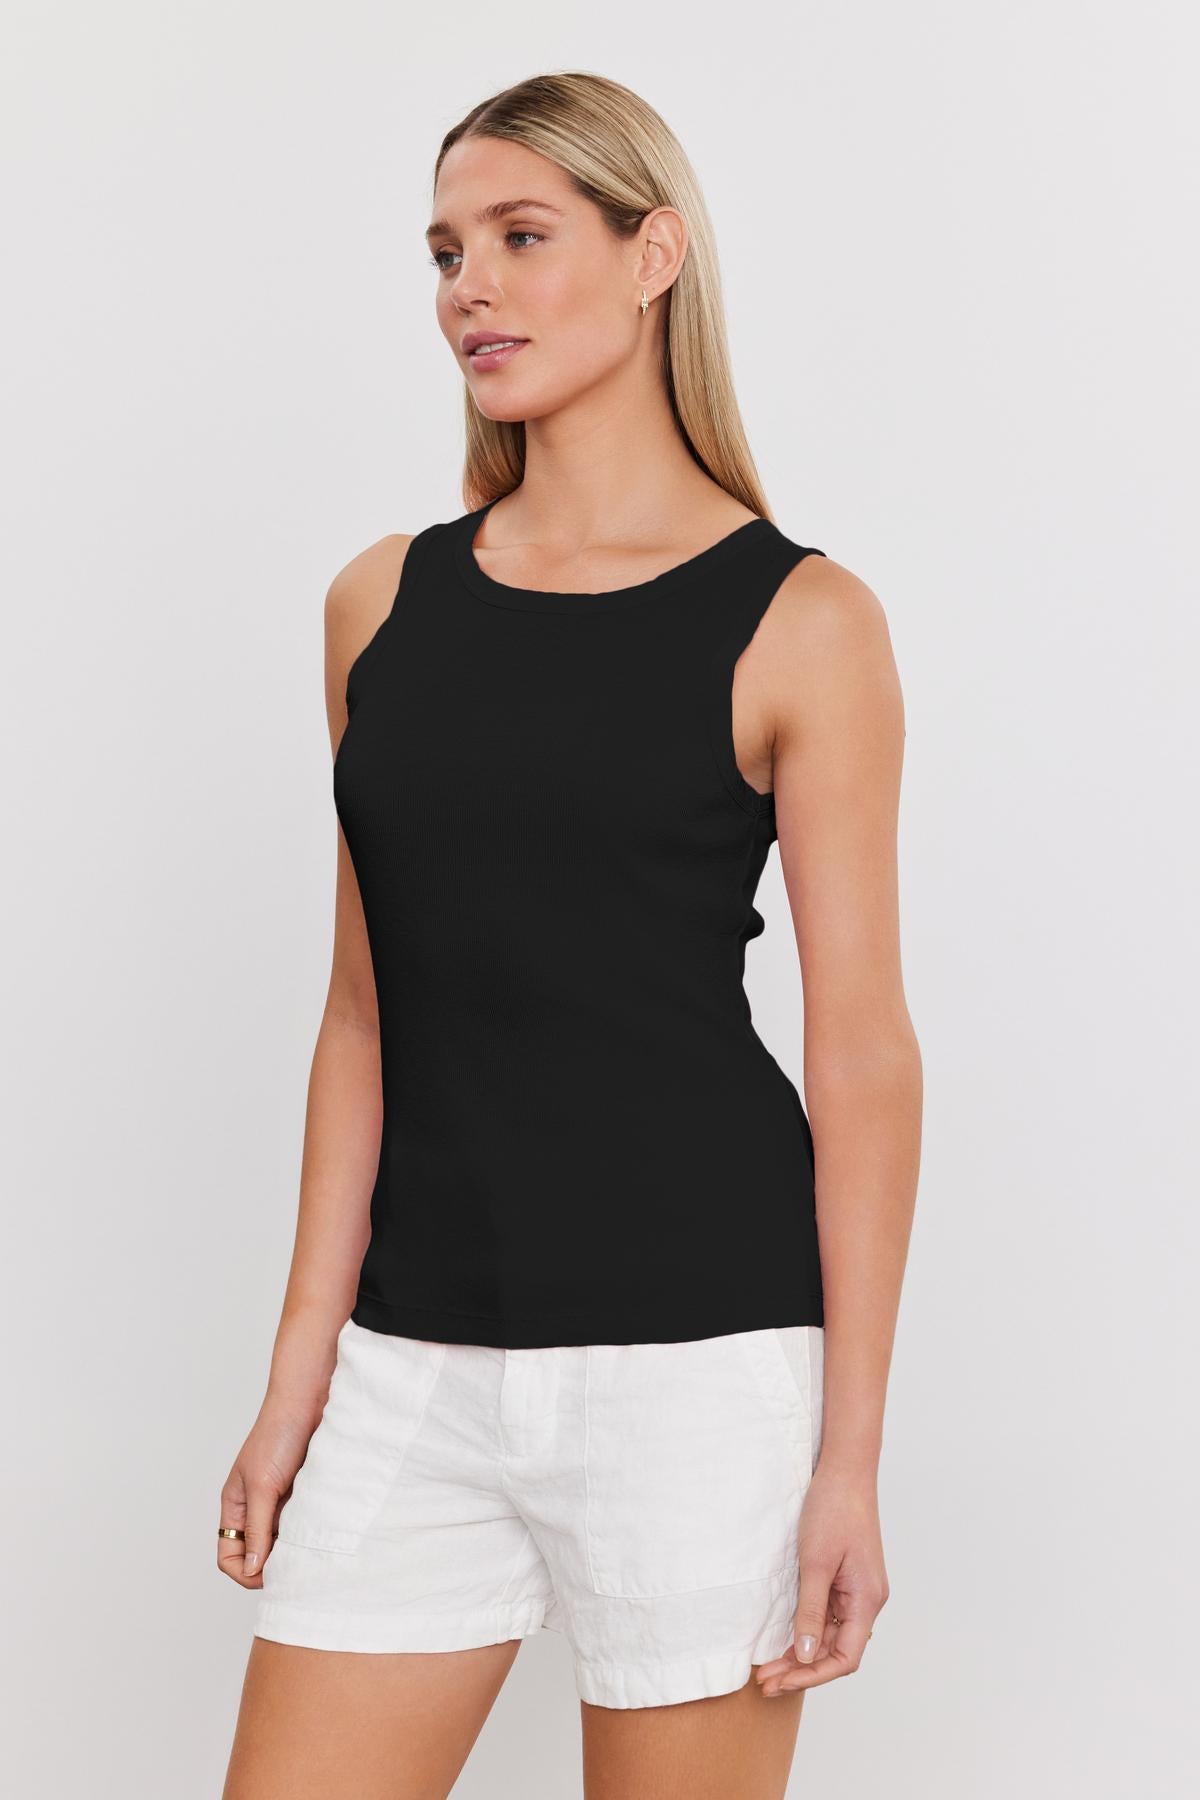 A person with long, straight hair is wearing a sleeveless black top and white shorts, standing against a plain white background. The ribbed knit of the MAXIE RIBBED TANK TOP by Velvet by Graham & Spencer adds a soft textured detail to the outfit.-37241154371777